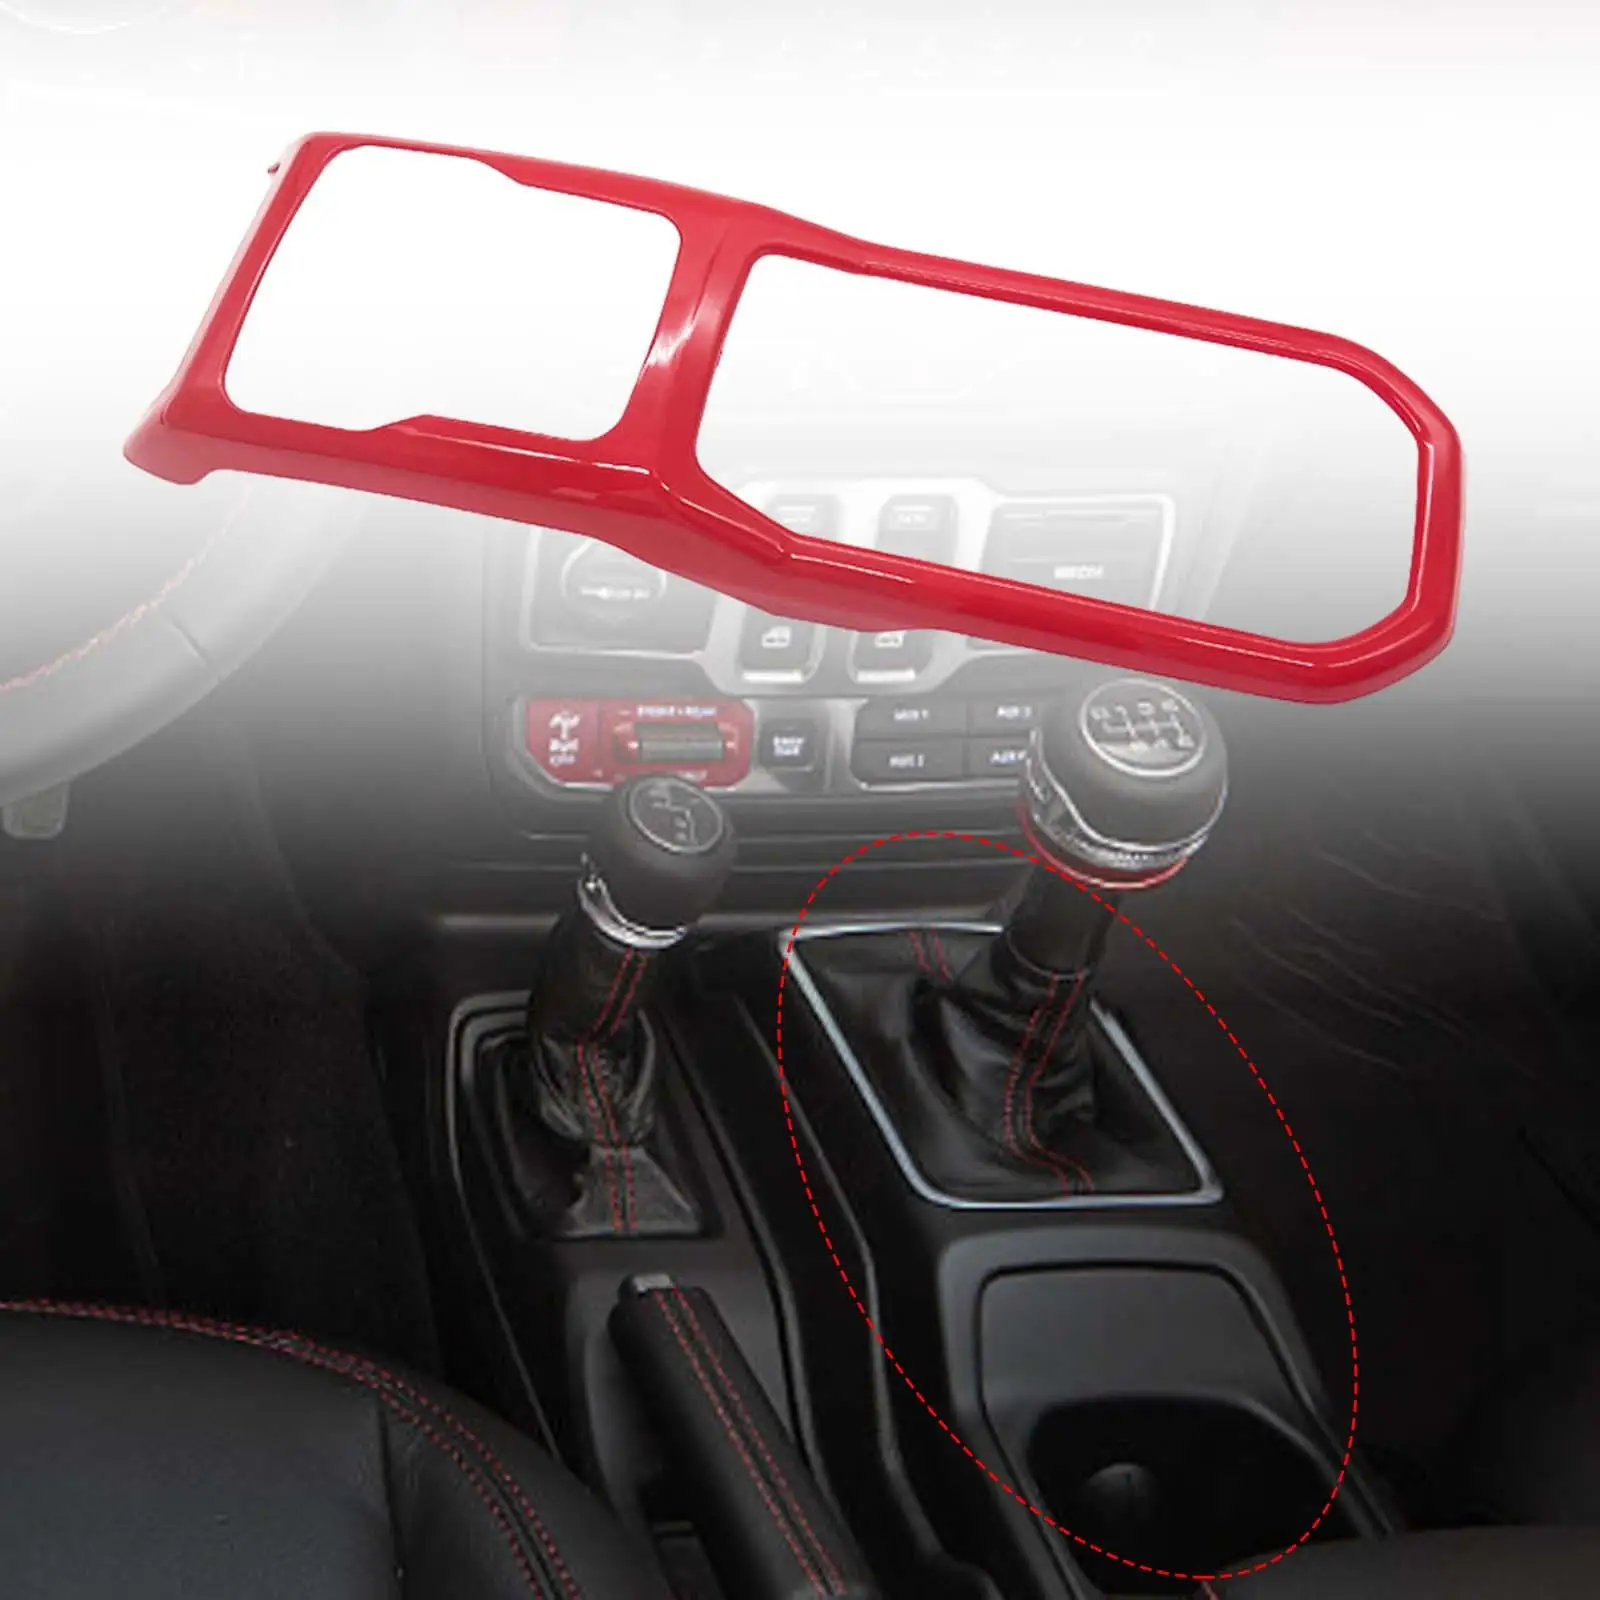 Gear Transfer Panel Cover Decoration Interior Accessories for Jeep 2018 to 2022 JL Stable Performance Easily to Install